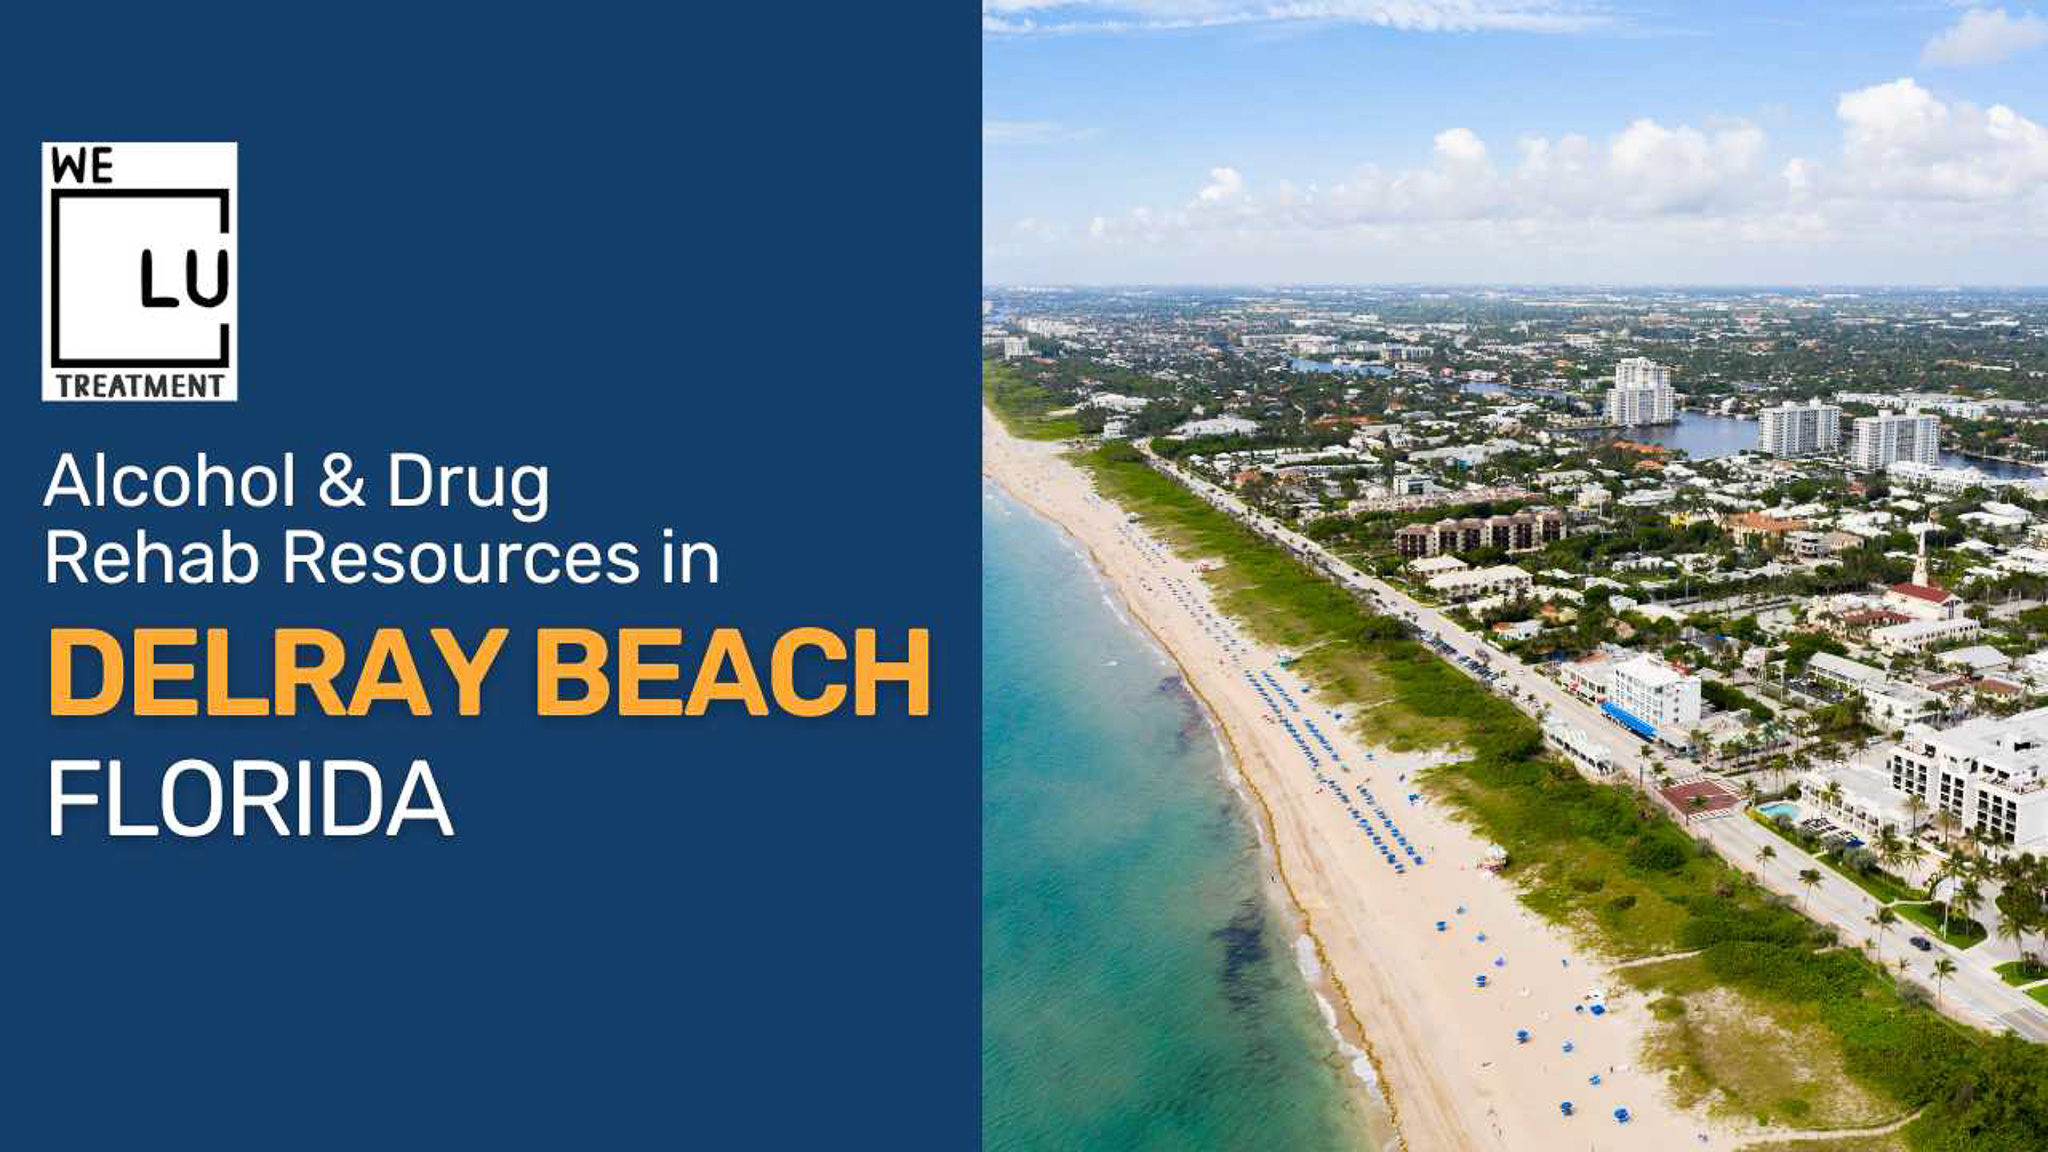 Delray Beach FL (SA) We Level Up treatment center for drug and alcohol rehab detox and mental health services - Image 1